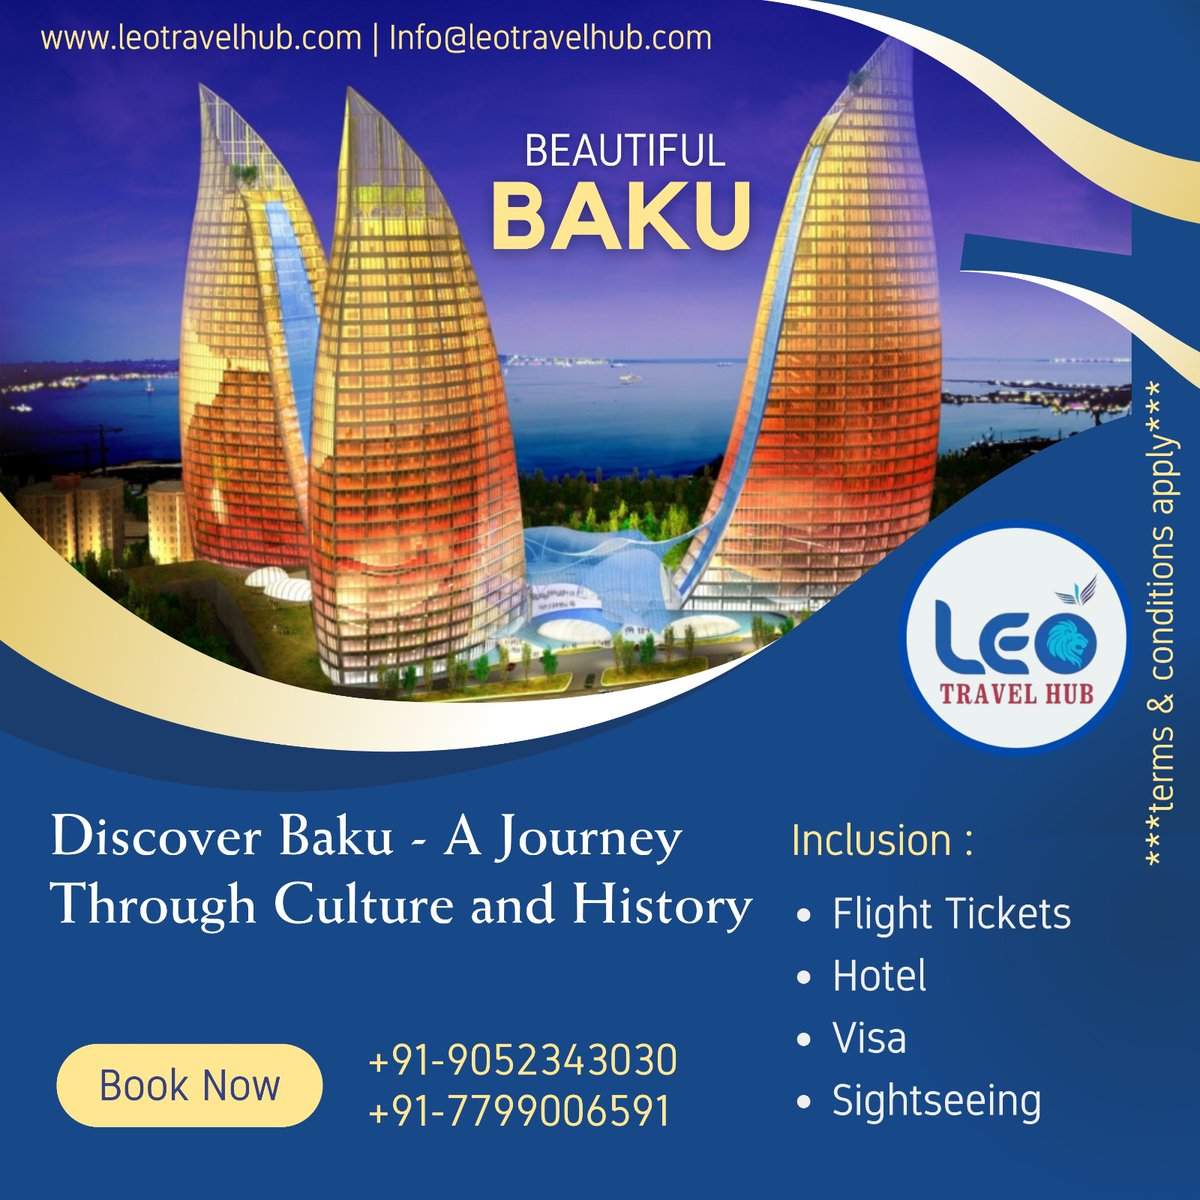 Travel To #Beautiful #Baku!
Book Now.

Get In Touch With Our Experts Today

☎️+91-9052343030
    +91-7799006591
🌐 leotravelhub.com
📬 info@leotreavelhub.com

#leotreavelhub
#azerbaijantourism 
#azerbaijan 
#travelazerbaijan 
#travel 
#baku 
#visitazerbaijan 
#tourism